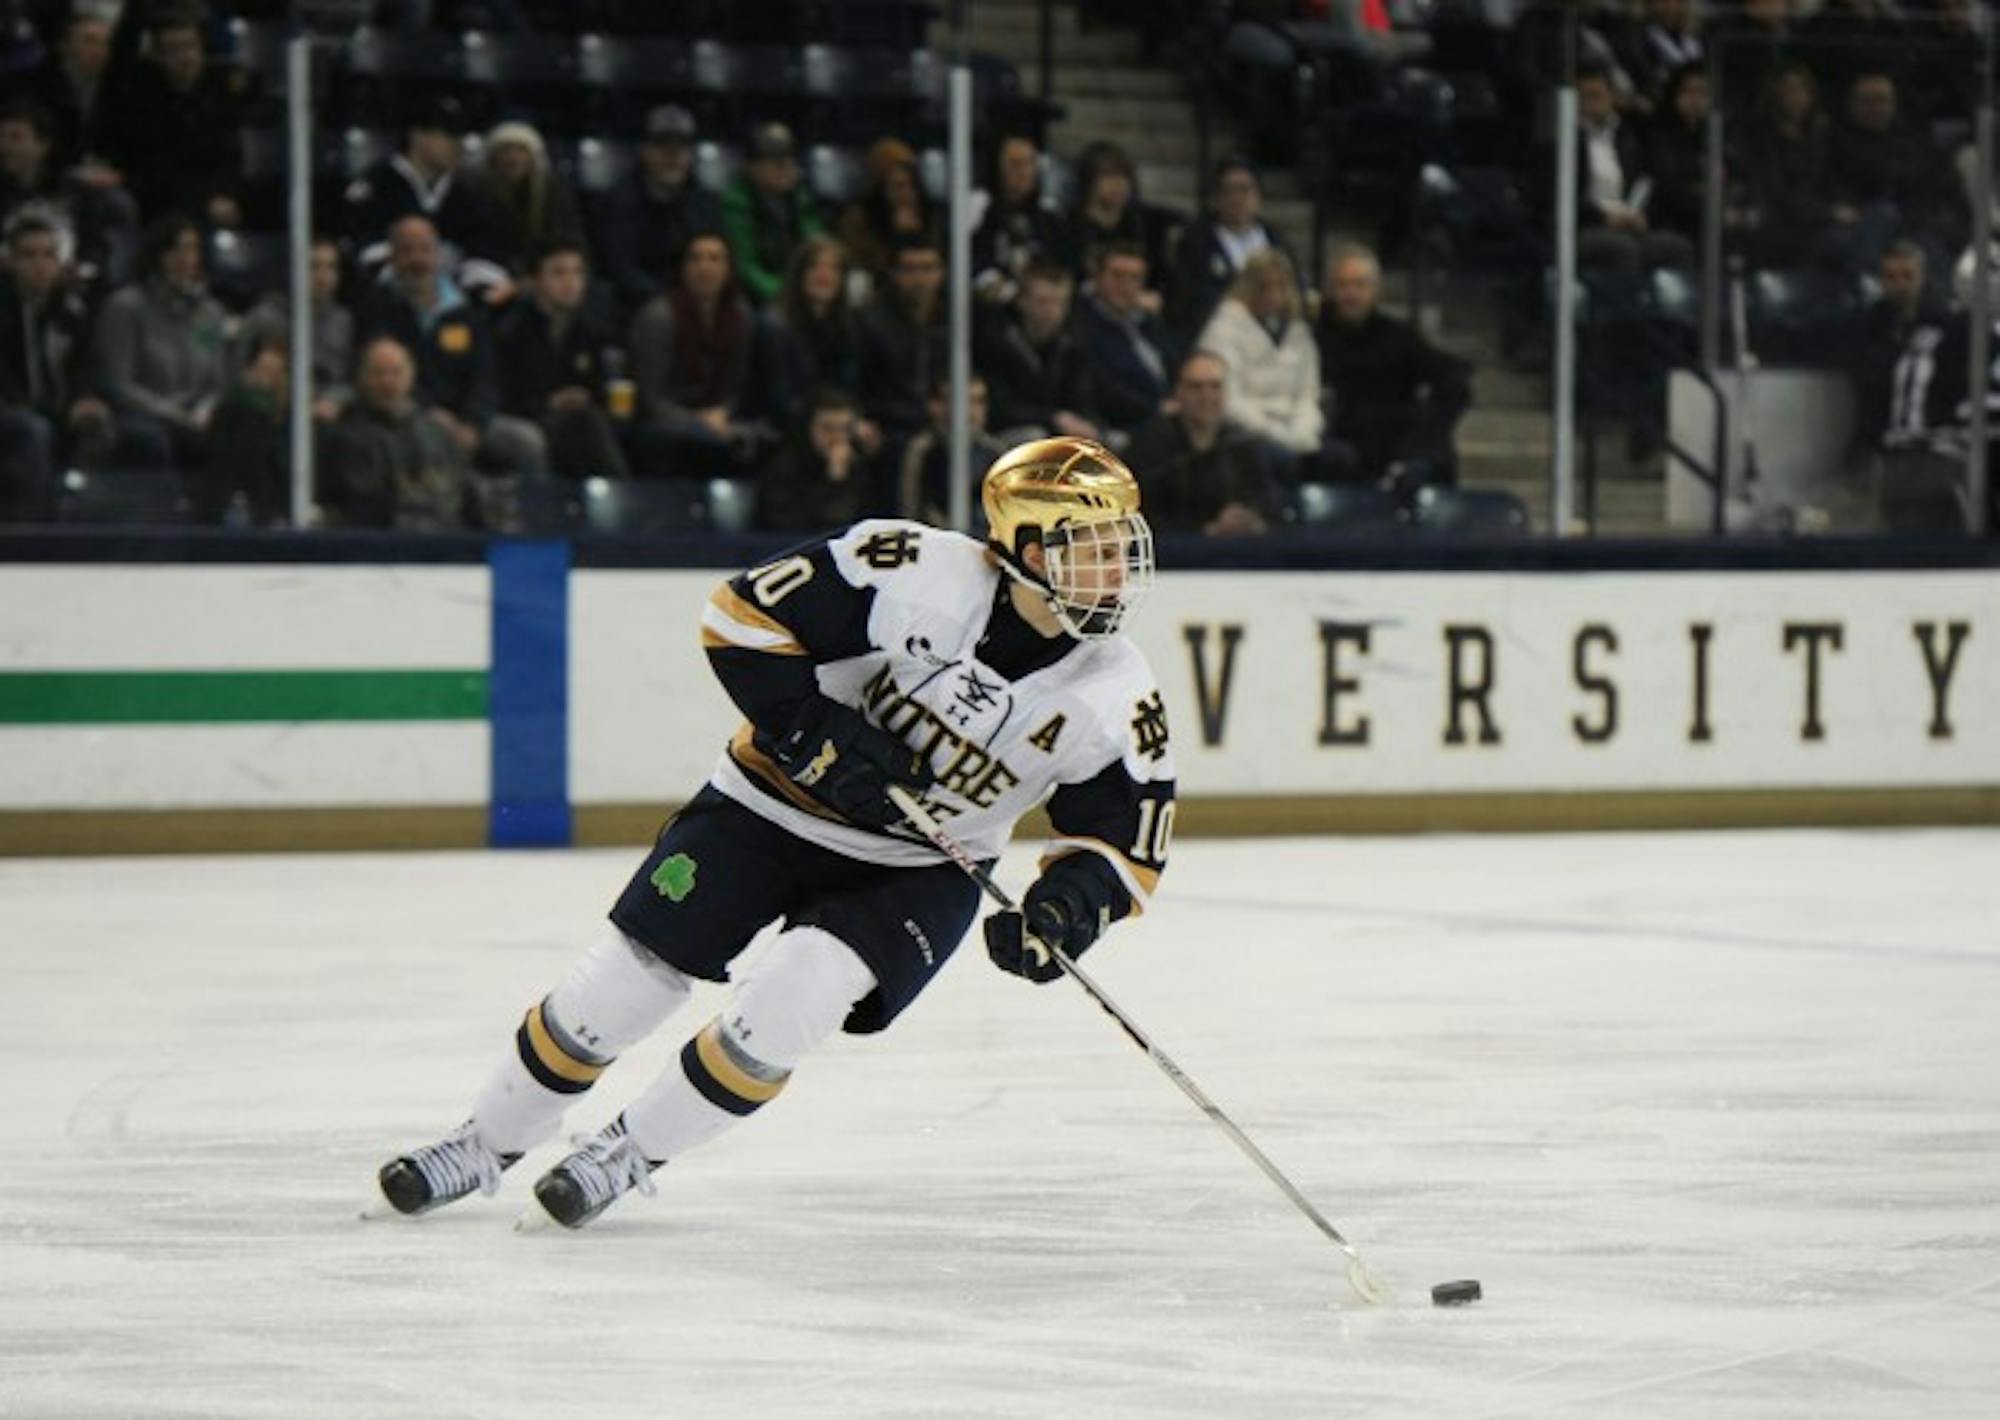 Irish junior forward Anders Bjork surveys the ice during Notre Dame’s 2-2 tie against New Hampshire on Friday at Compton Family Ice Arena. Bjork leads the team with 15 goals and 21 assists on the season.